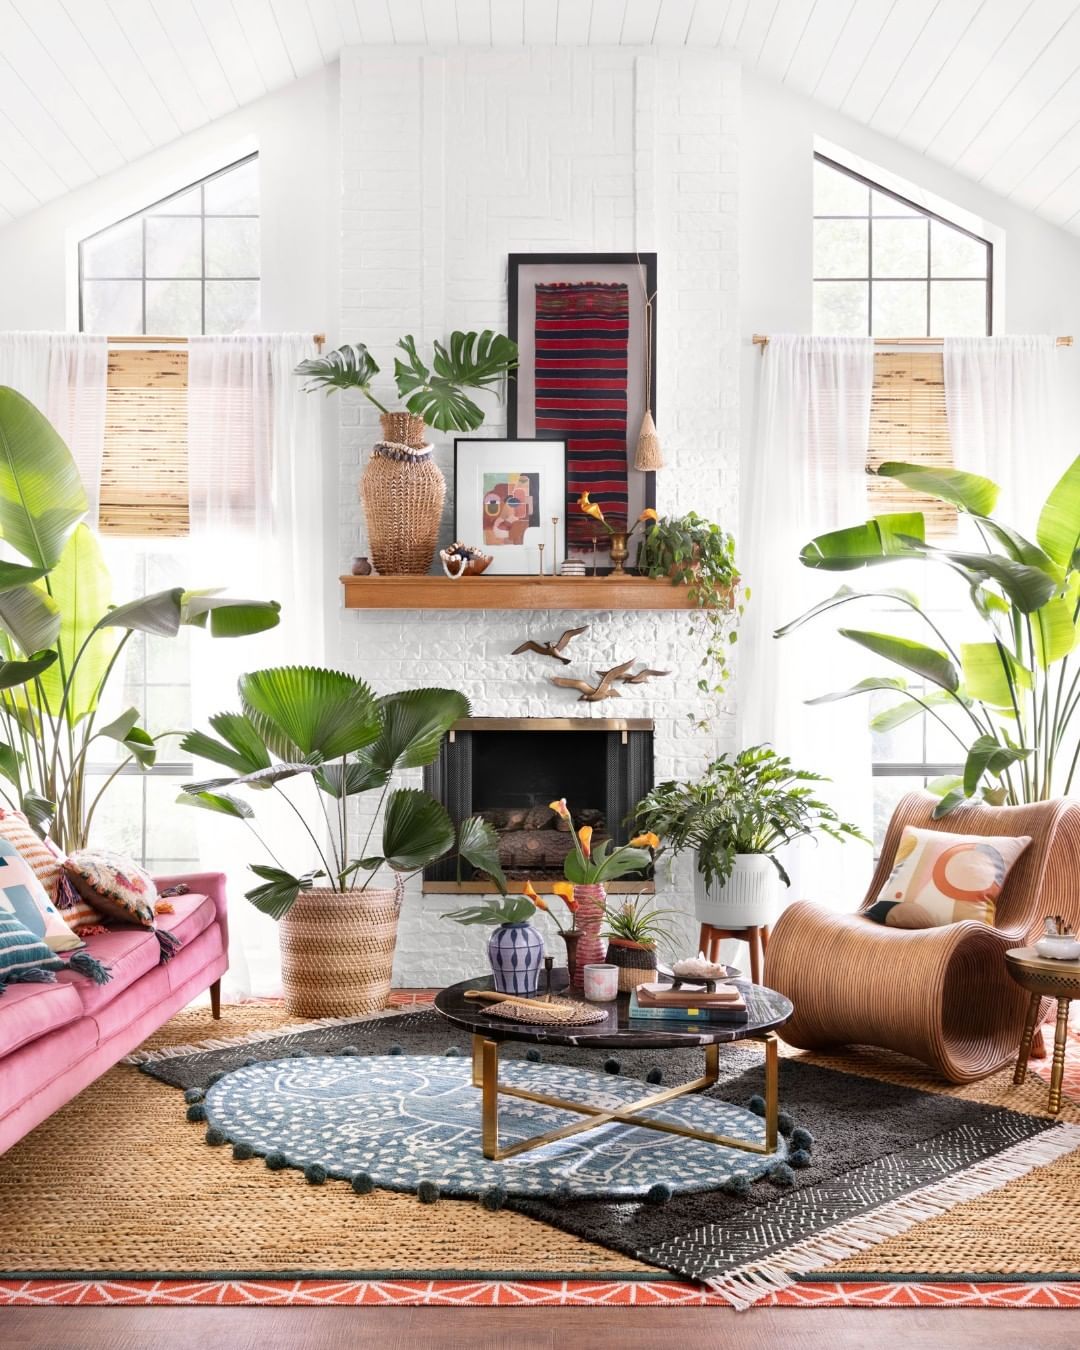 White living room with a fireplace, lots of plants, and furniture on an outdoor rug, an additional, softer rug atop it, and a circular blue-and-white patterned rug above that one, under the coffee table. Photo by Instagram user @rugs.shop.